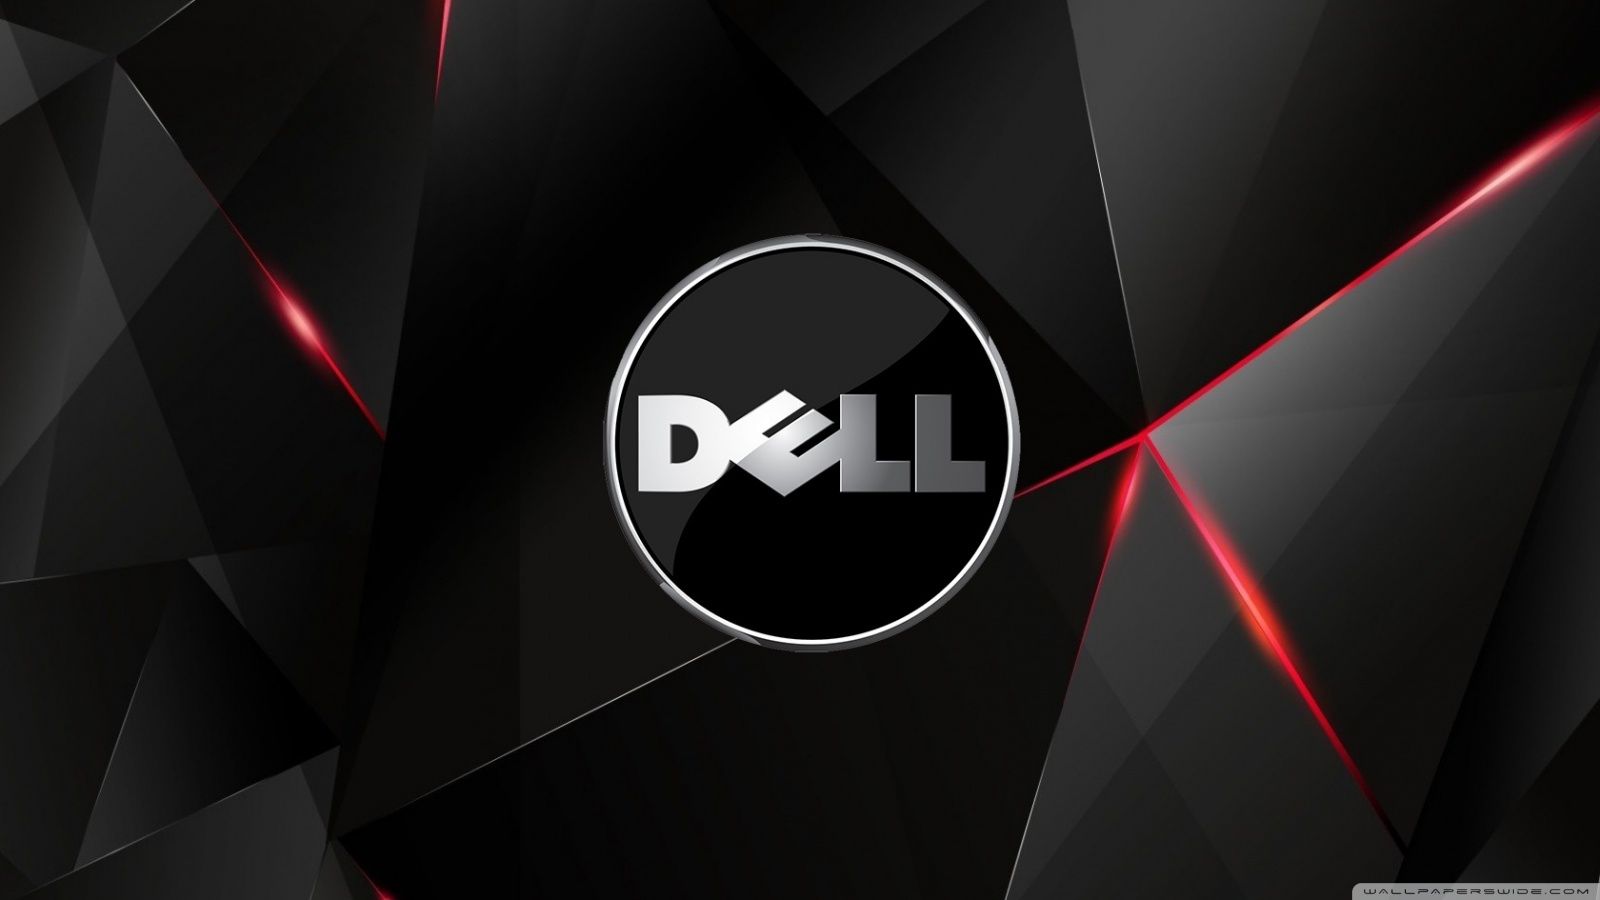 62 Dell Backgrounds On Wallpapersafari